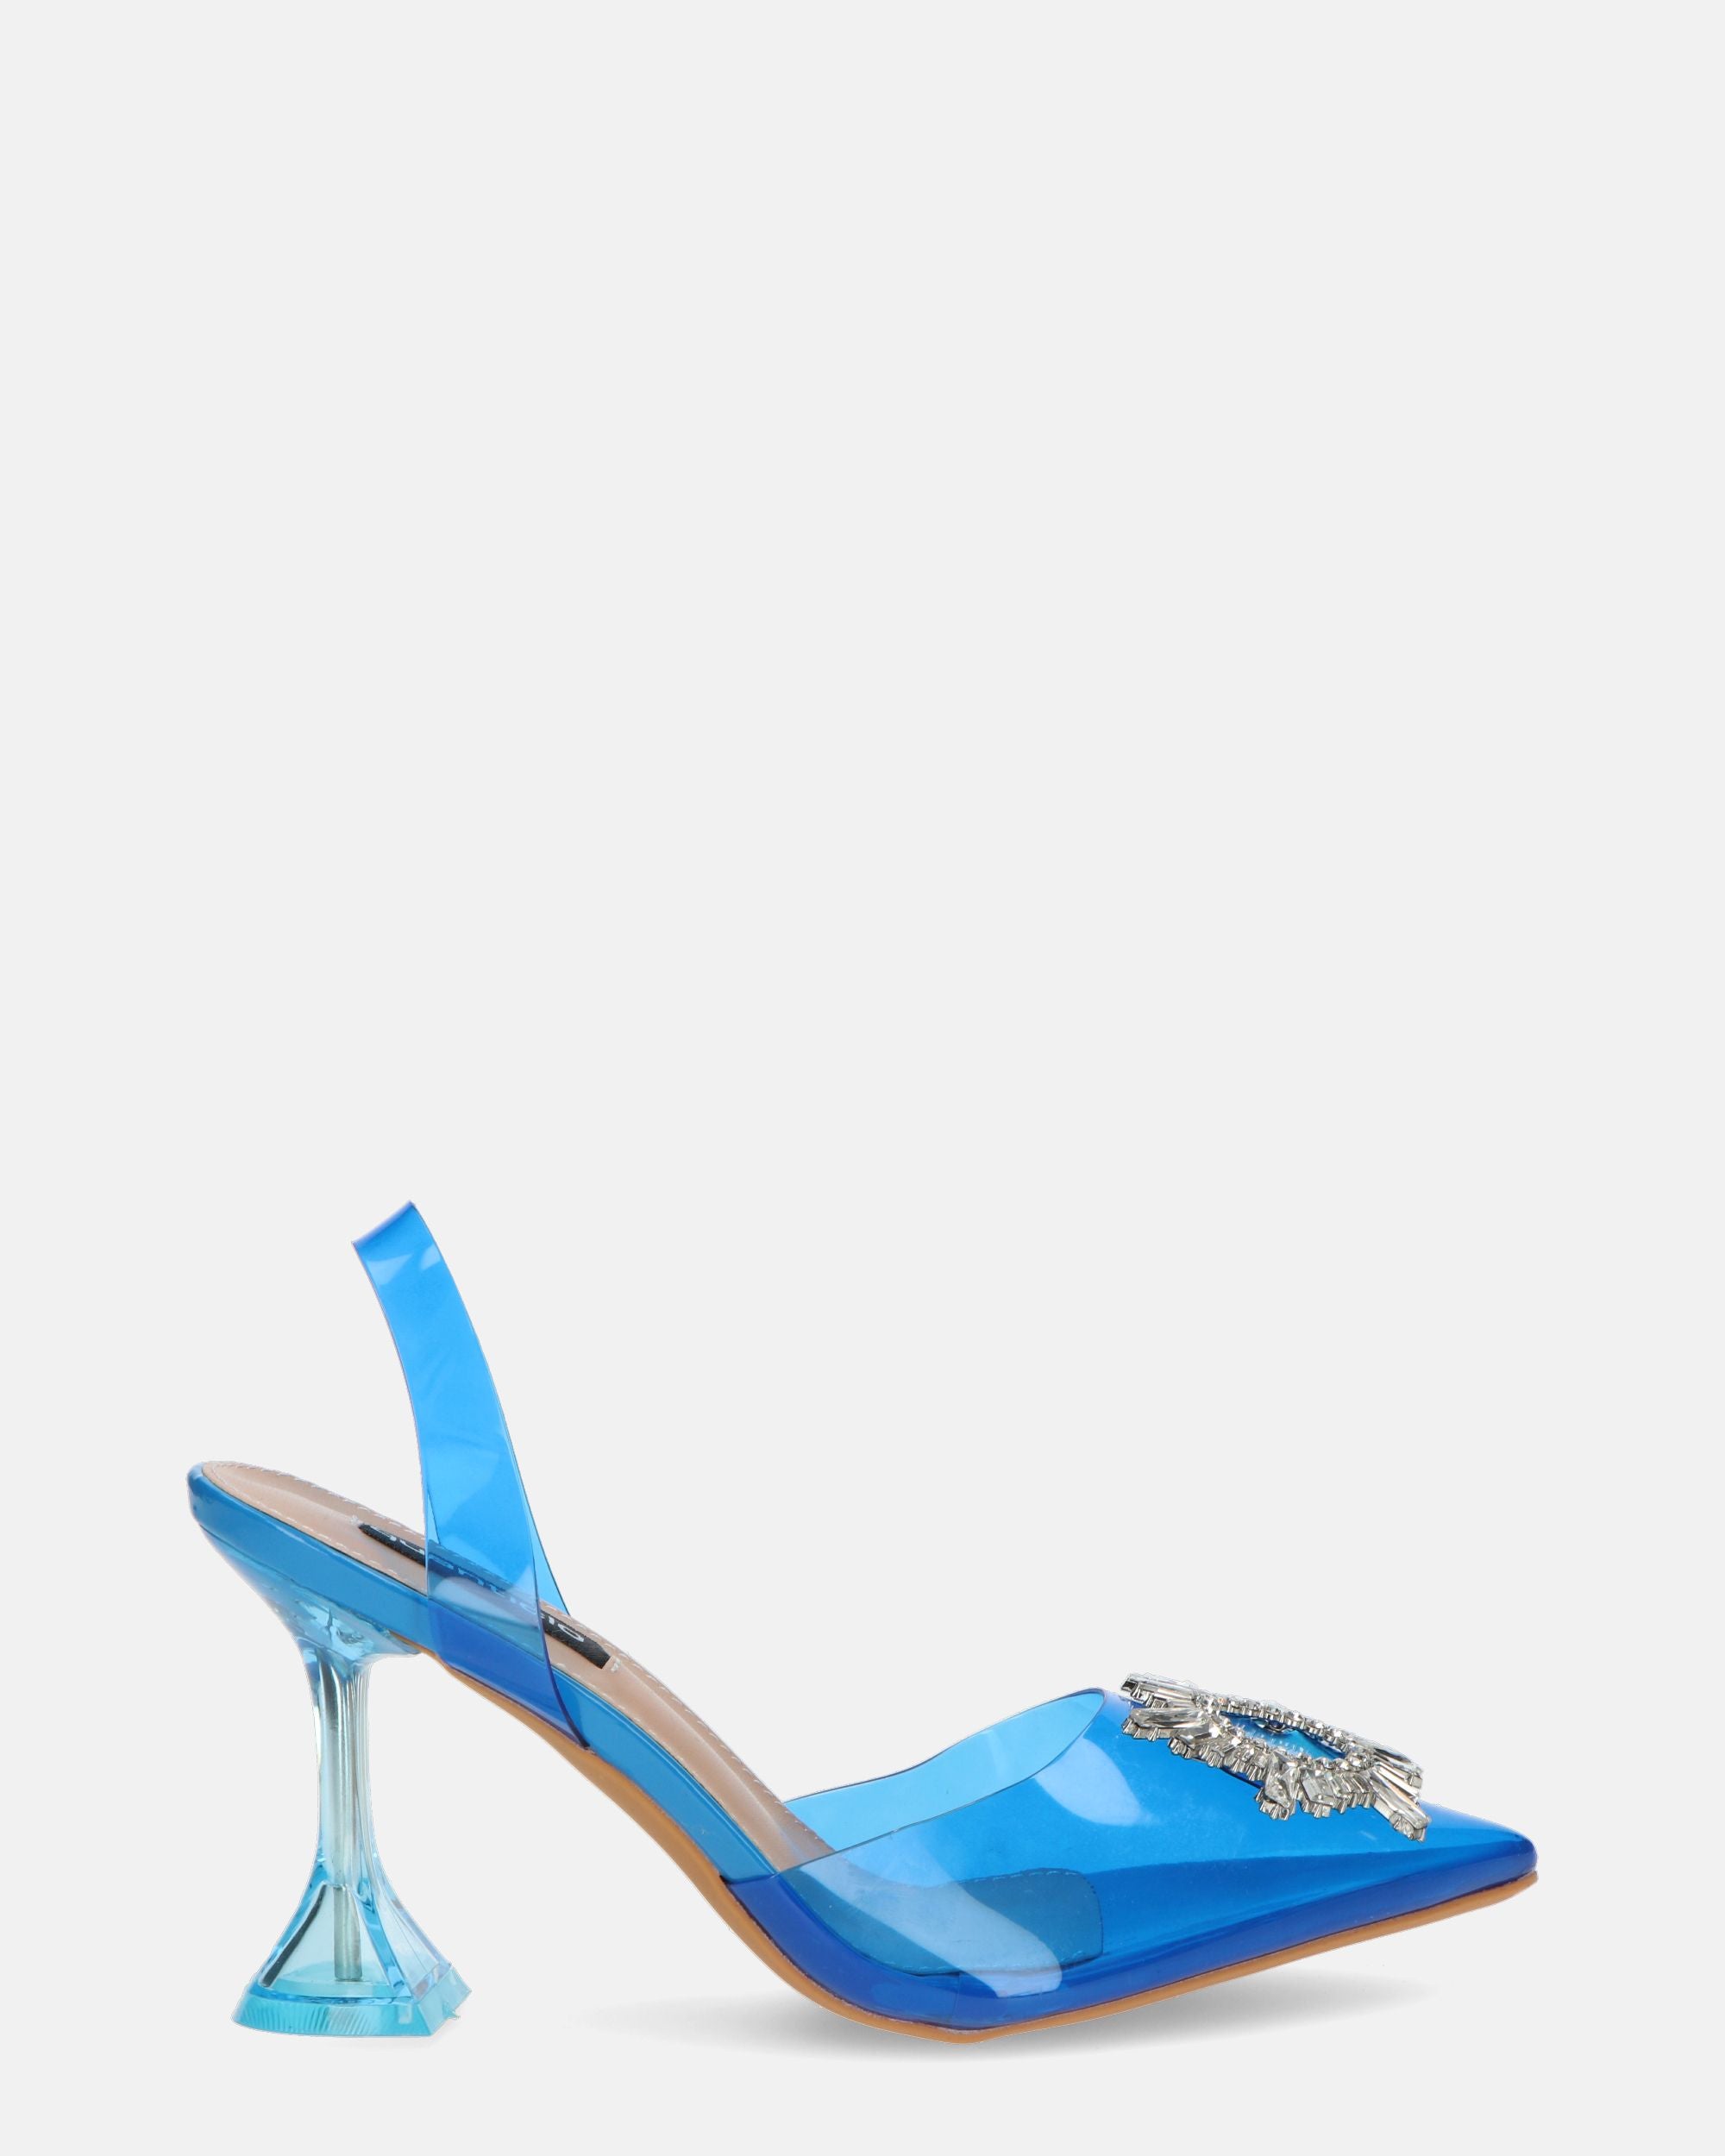 KENAN - blue perspex shoes with gemstone decoration on the toe